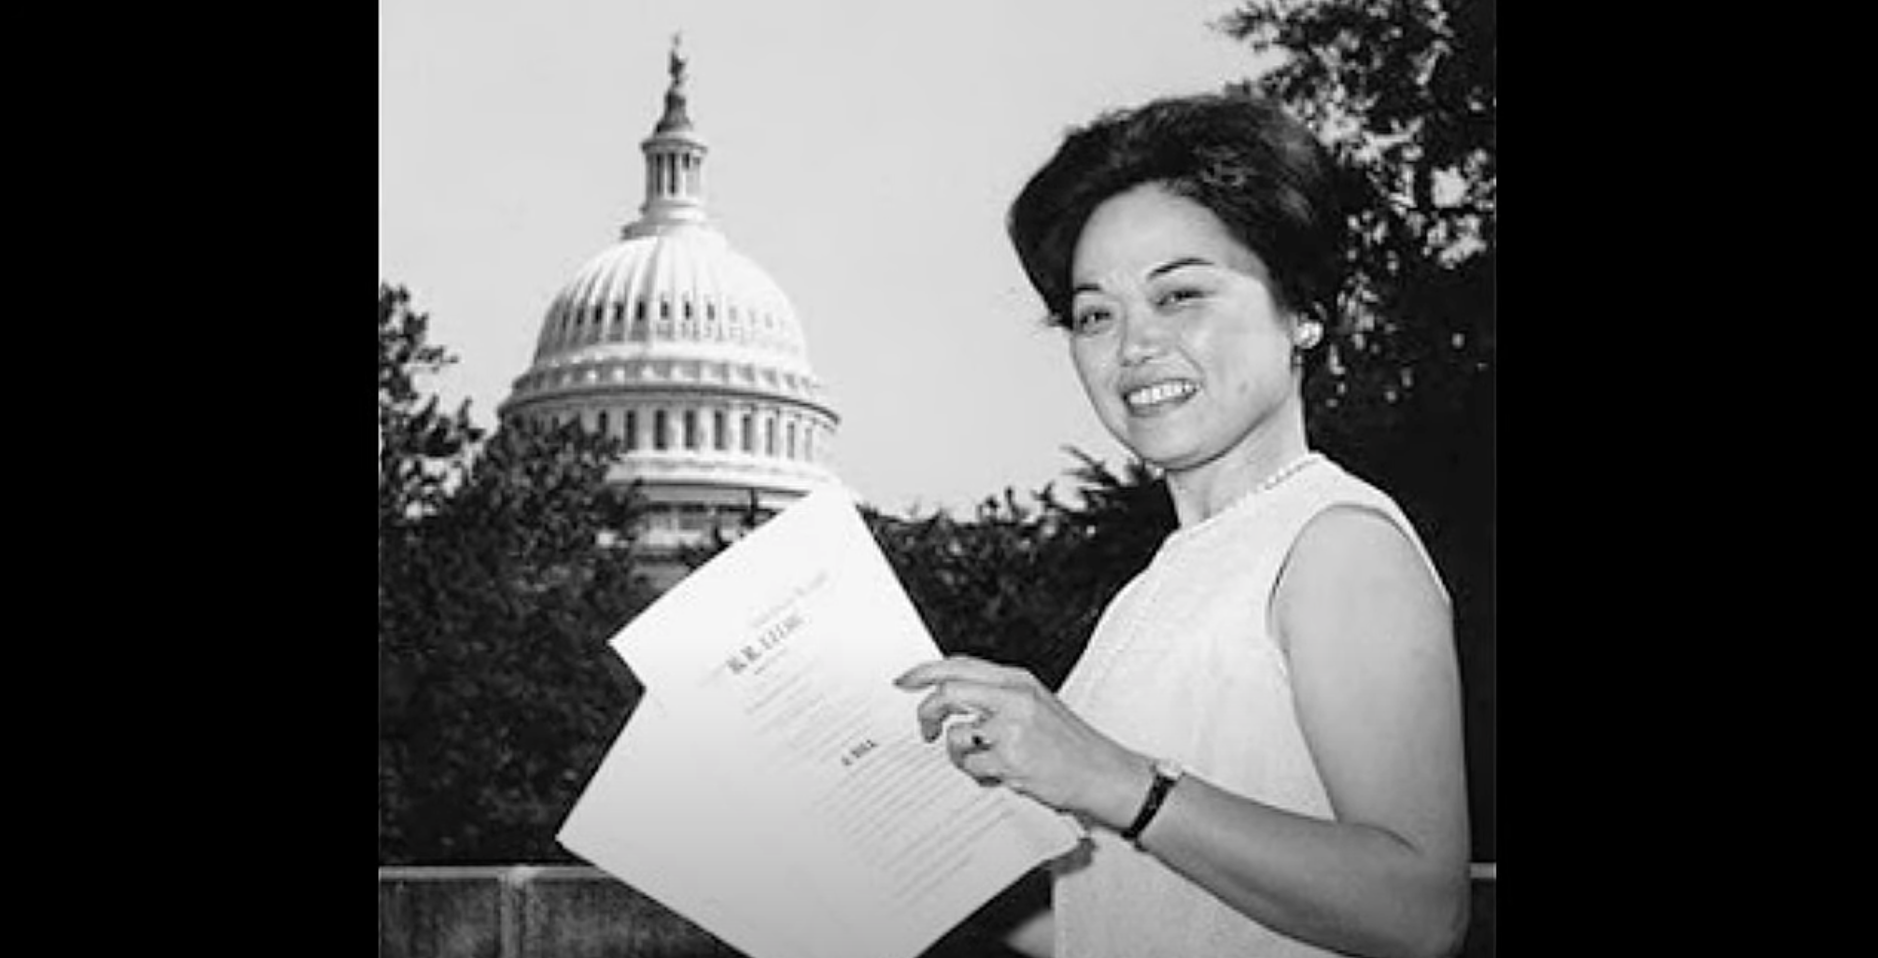 Title IX Lawmaker Patsy Mink | First Woman of Color in Congress